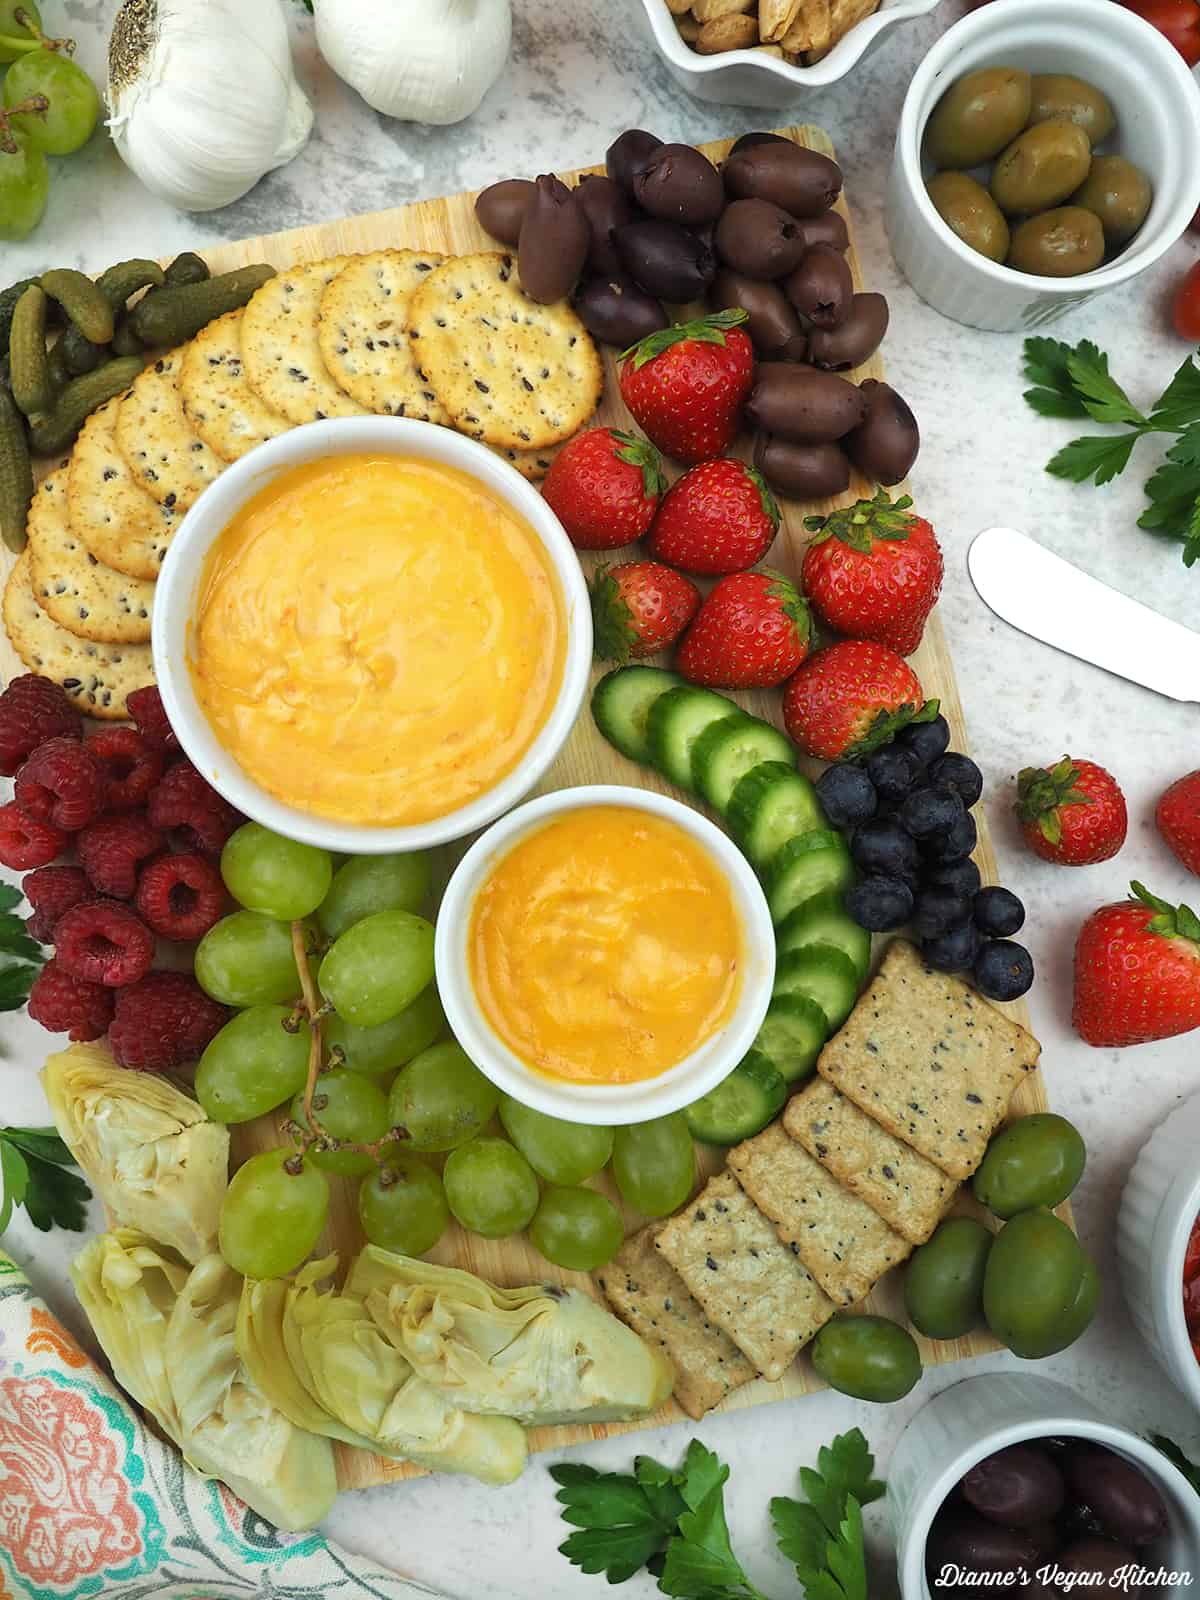 Cheese board with Smoked Almond Cheddar, fruit, nuts, and crackers